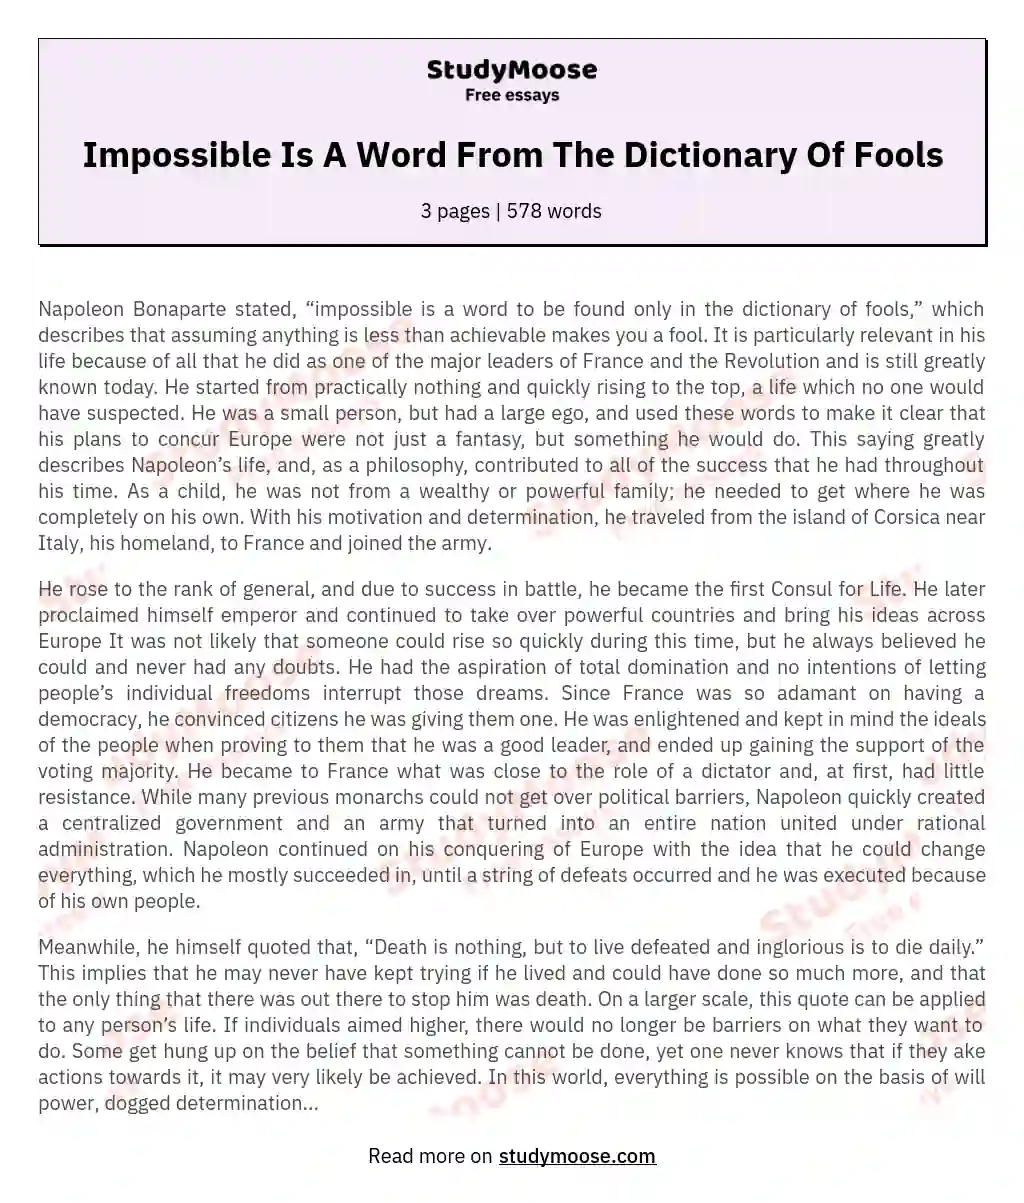 Impossible Is A Word From The Dictionary Of Fools essay